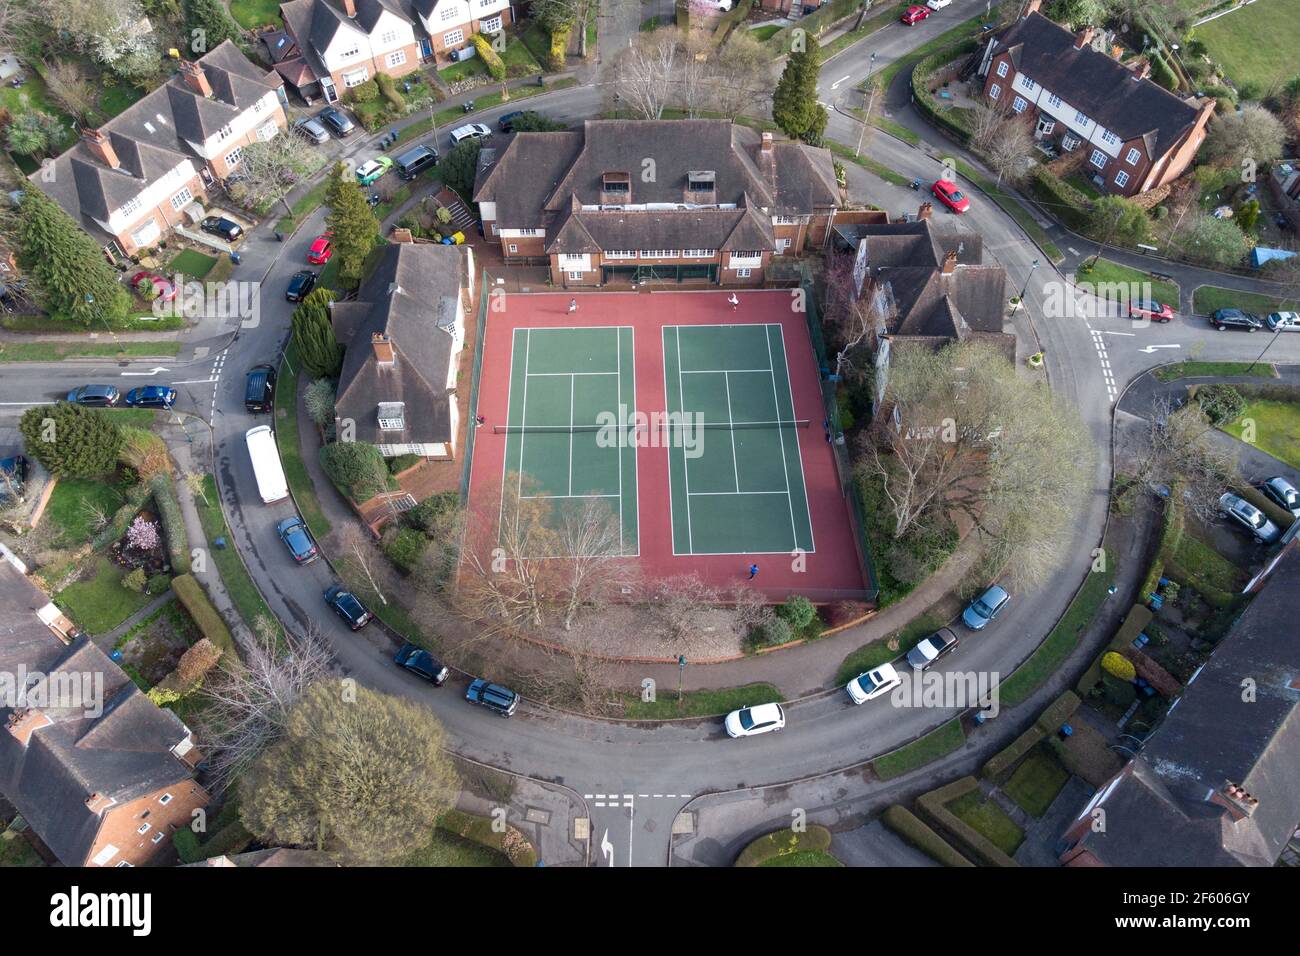 Birmingham, West Midlands, UK. 29th Mar, 2021. The Circle Tennis Club in Harborne, Birmingham UK is back in action as various coronavirus lockdown restrictions have been lifted on 'Happy Monday'. The rule of 6 has also been introduced meaning more people can congregate together outside. Pic by Credit: Sam Holiday/Alamy Live News Stock Photo